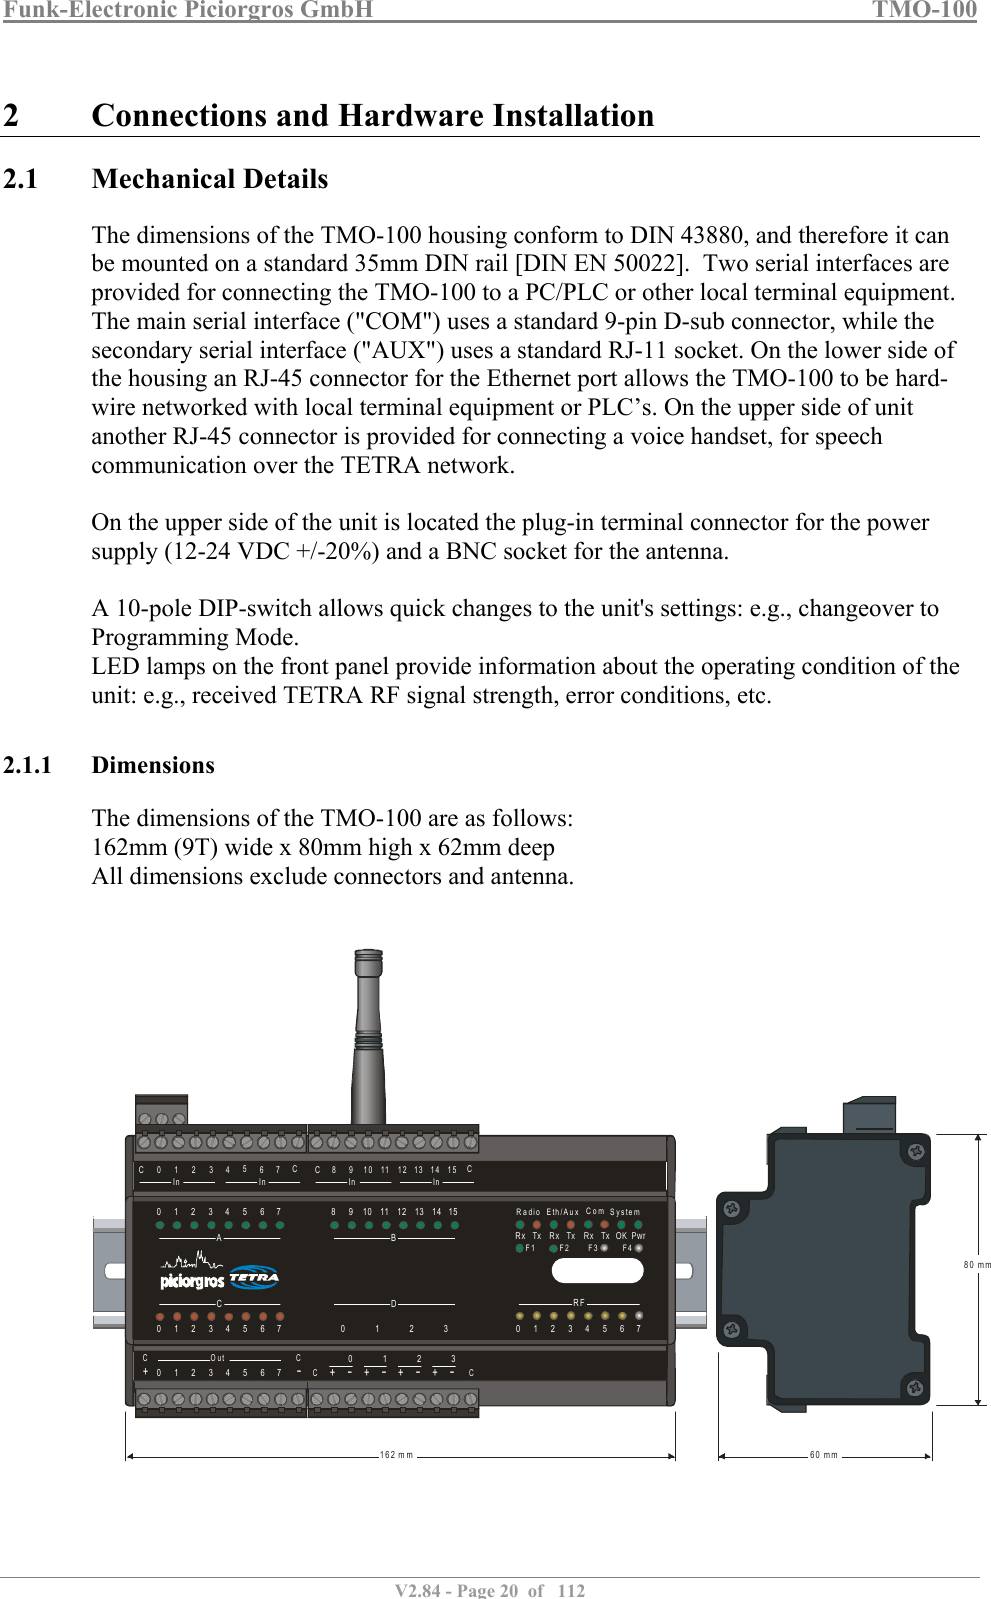 Funk-Electronic Piciorgros GmbH   TMO-100   V2.84 - Page 20  of   112   2 Connections and Hardware Installation 2.1 Mechanical Details The dimensions of the TMO-100 housing conform to DIN 43880, and therefore it can be mounted on a standard 35mm DIN rail [DIN EN 50022].  Two serial interfaces are provided for connecting the TMO-100 to a PC/PLC or other local terminal equipment. The main serial interface (&quot;COM&quot;) uses a standard 9-pin D-sub connector, while the secondary serial interface (&quot;AUX&quot;) uses a standard RJ-11 socket. On the lower side of the housing an RJ-45 connector for the Ethernet port allows the TMO-100 to be hard-wire networked with local terminal equipment or PLC’s. On the upper side of unit another RJ-45 connector is provided for connecting a voice handset, for speech communication over the TETRA network.   On the upper side of the unit is located the plug-in terminal connector for the power supply (12-24 VDC +/-20%) and a BNC socket for the antenna.   A 10-pole DIP-switch allows quick changes to the unit&apos;s settings: e.g., changeover to Programming Mode.  LED lamps on the front panel provide information about the operating condition of the unit: e.g., received TETRA RF signal strength, error conditions, etc.  2.1.1 Dimensions The dimensions of the TMO-100 are as follows: 162mm (9T) wide x 80mm high x 62mm deep All dimensions exclude connectors and antenna.      RFBDAC080123001911210223113341244513556146671577CCOut CC+++++-----012301234567CC0819210311412513614In InIn In715CC80 mm60 mm162 mmRadioRx Rx RxTx Tx Tx OK PwrEth/Aux SystemComF1 F2 F4F3